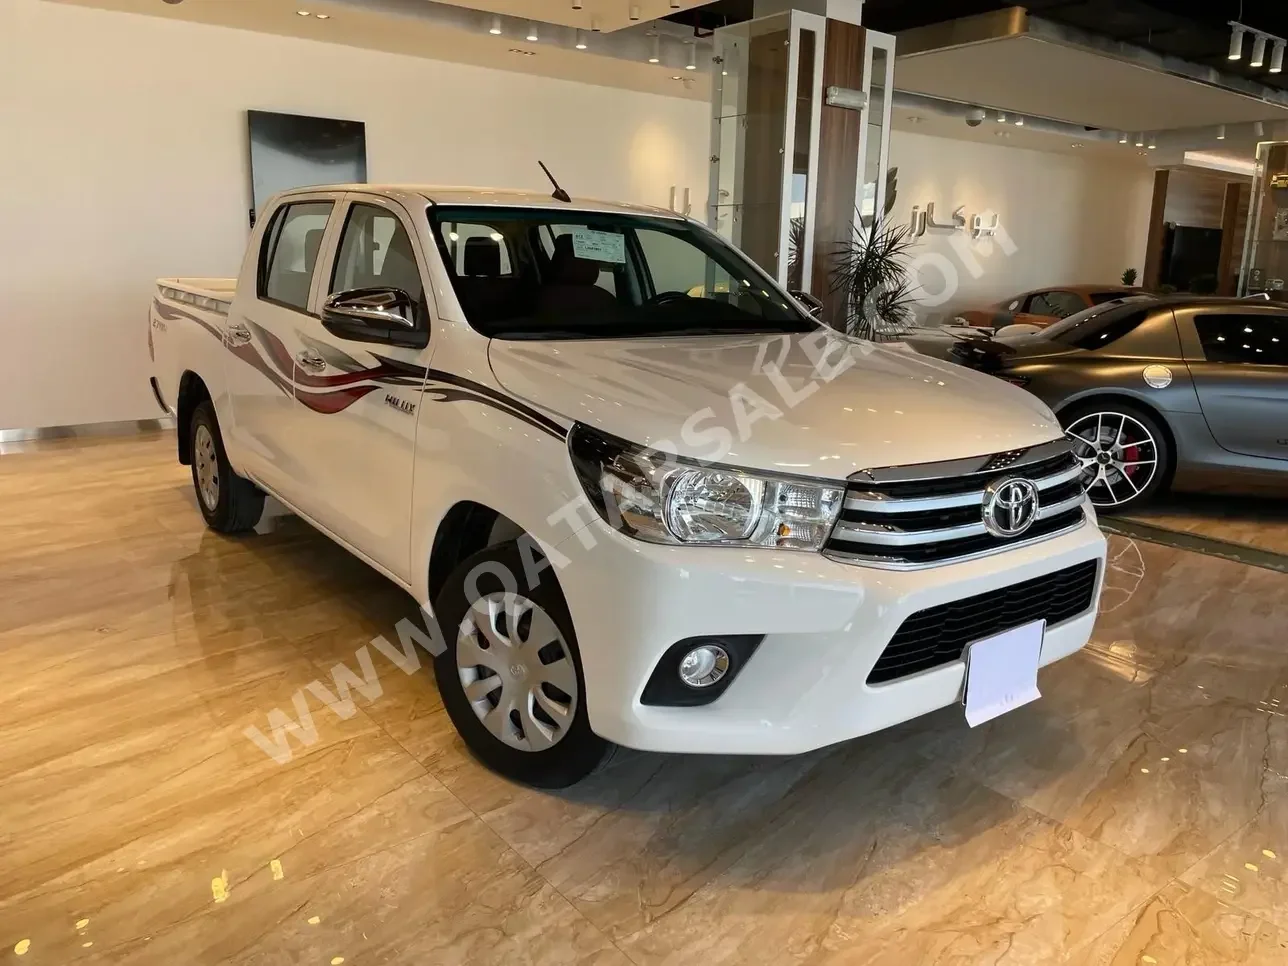 Toyota  Hilux  2020  Automatic  31,000 Km  4 Cylinder  Front Wheel Drive (FWD)  Pick Up  White